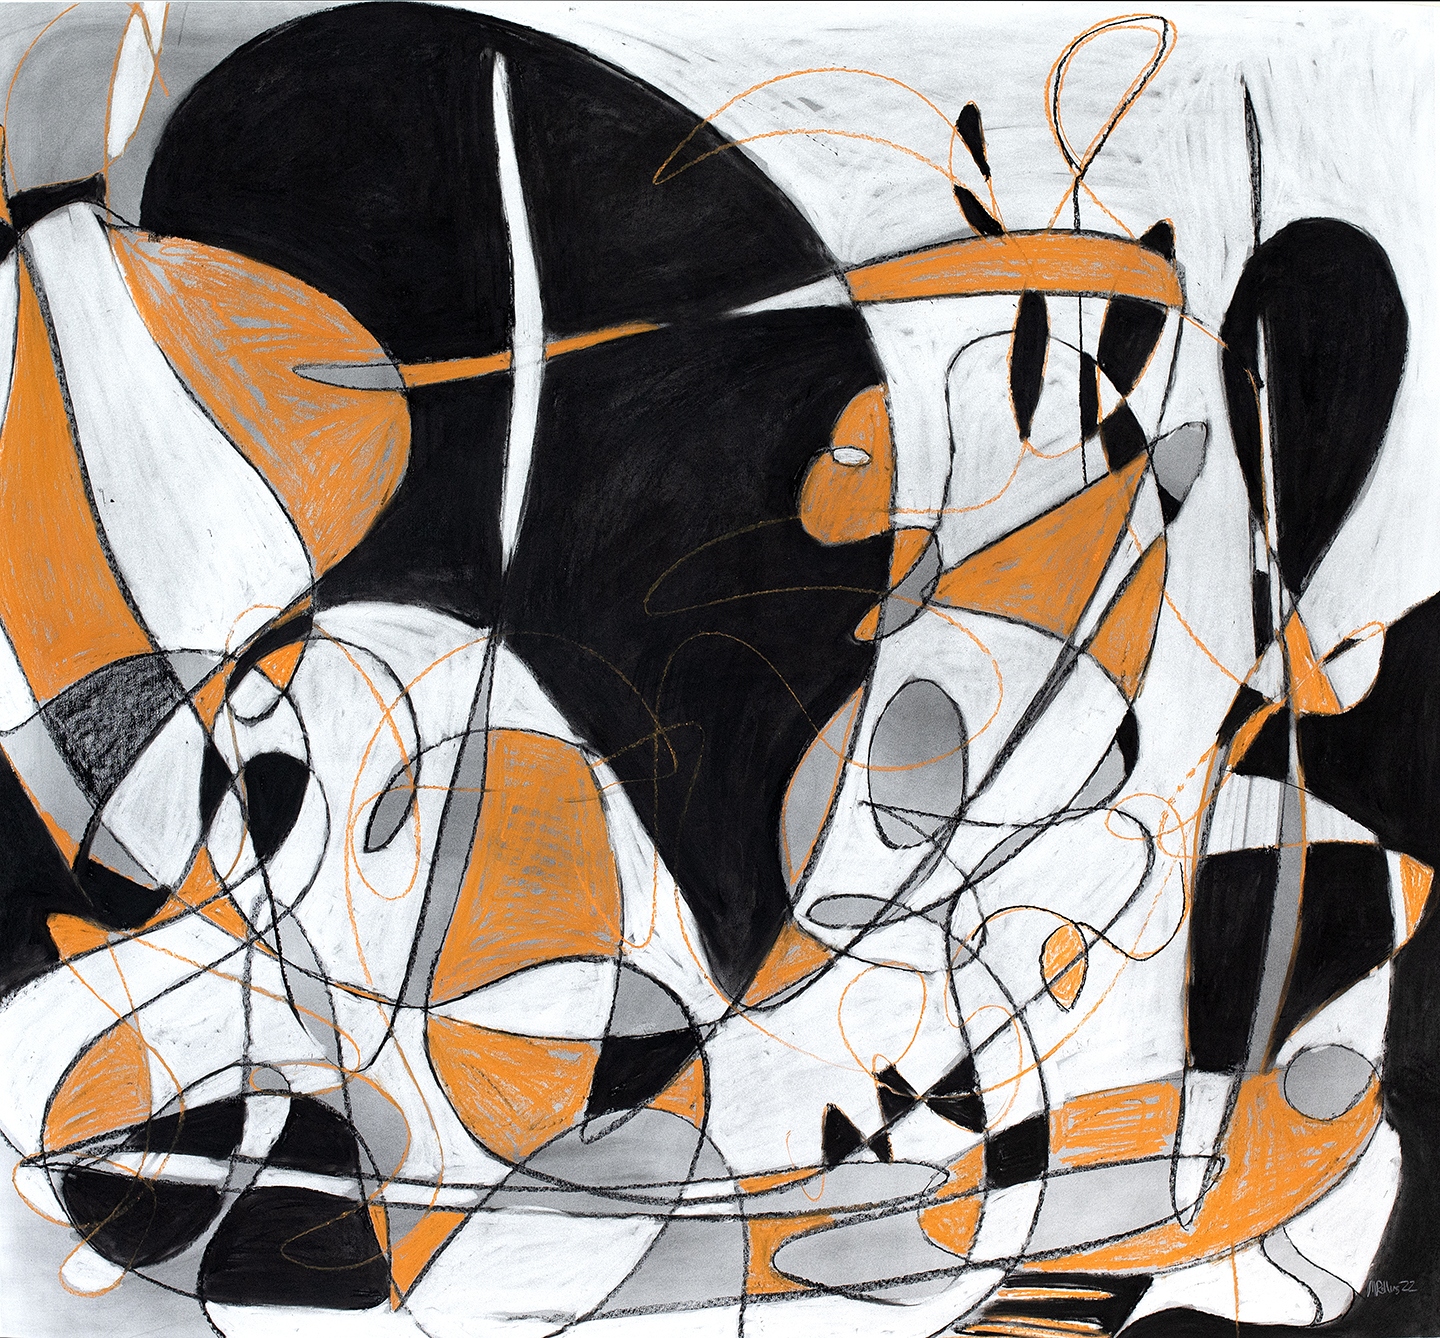 Dancing, 46 x 55 inches, conte crayon on paper, 2022